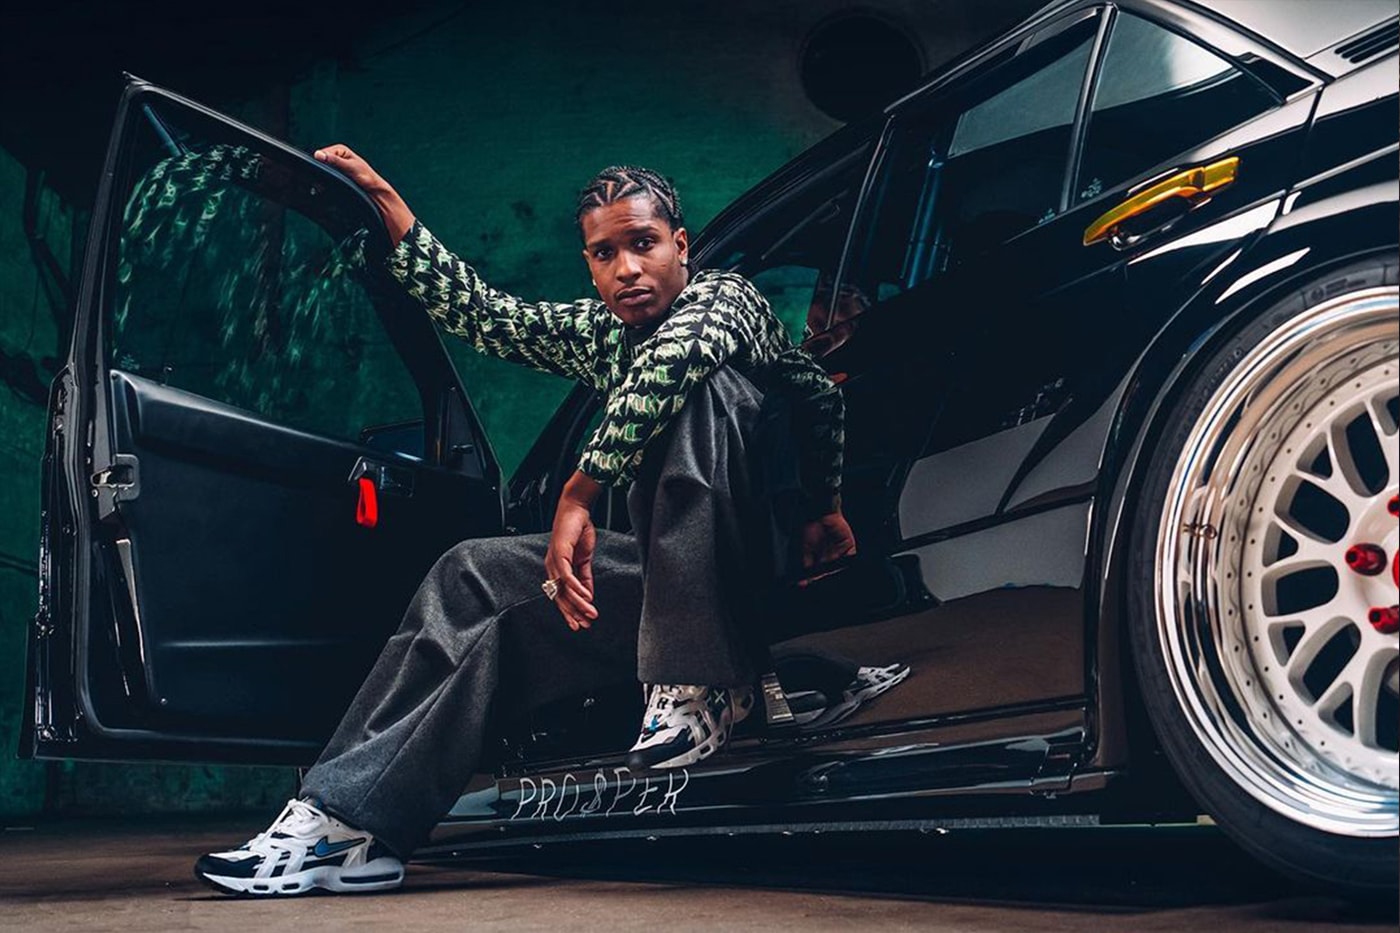 A$AP Rocky x 'Need for Speed' Mercedes-Benz 190E